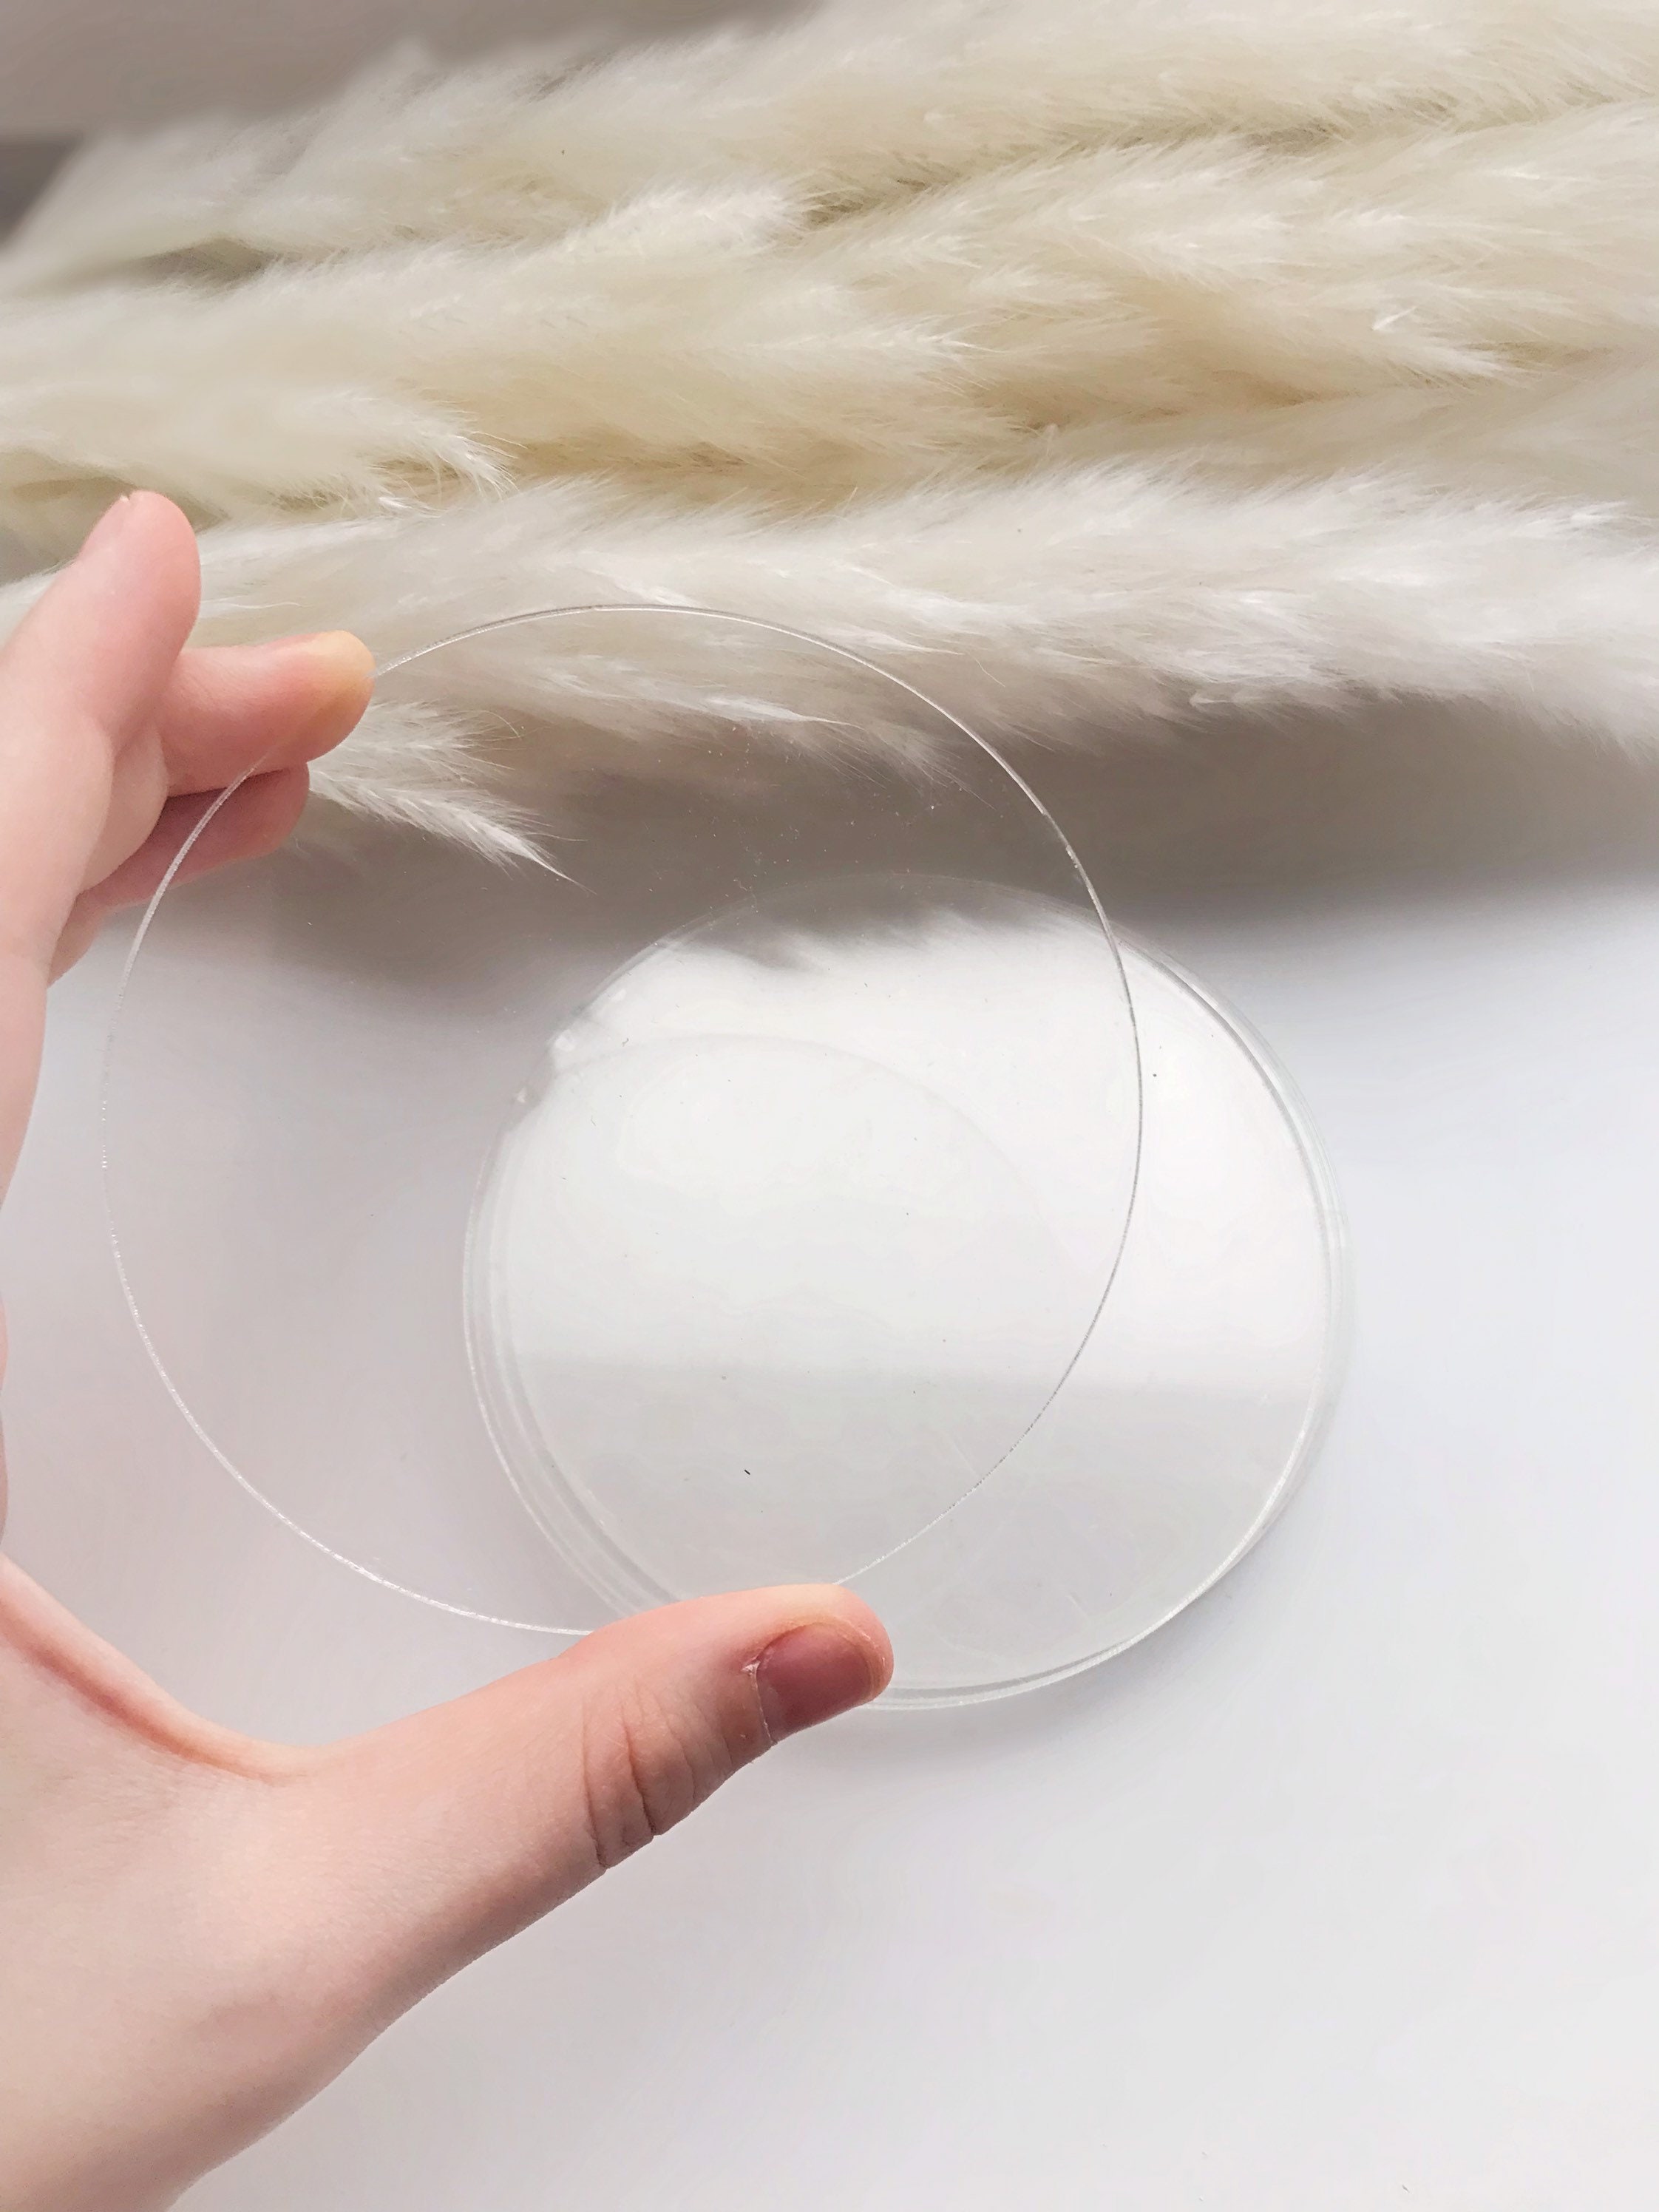 JINMURY 2 Pcs 8 inch Clear Acrylic Circles Blanks Acrylic Discs Transparent Plexiglass Disk Round Acrylic Sheet for DIY Projects and Crafts